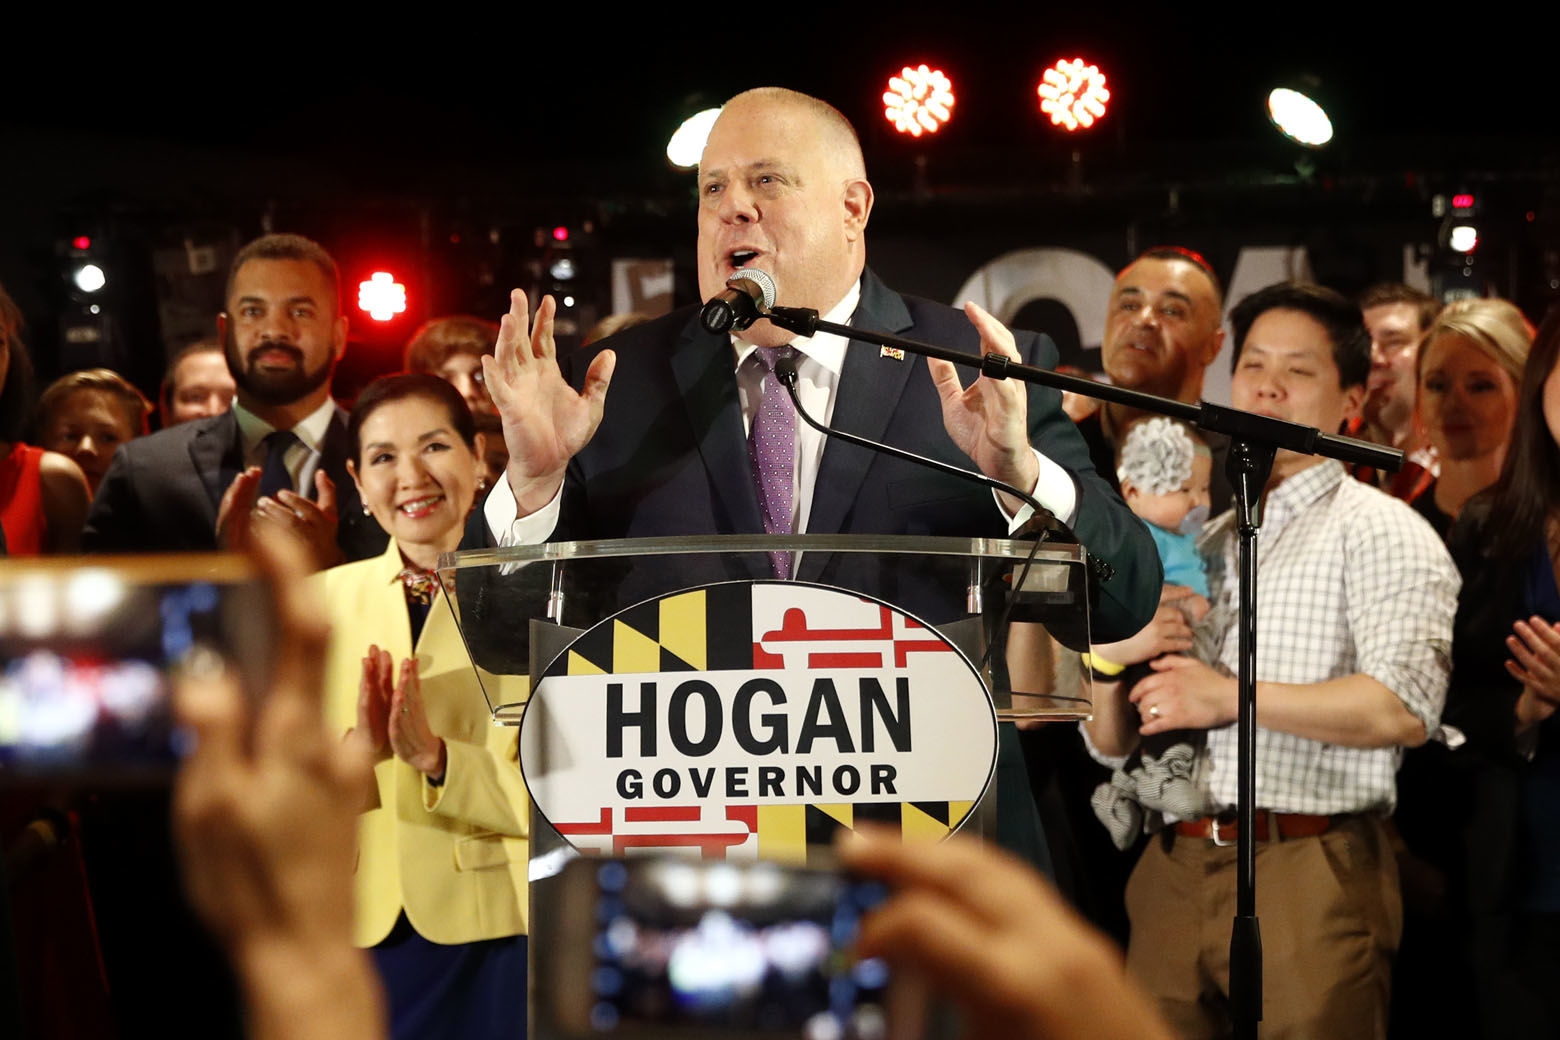 Maryland Gov. Larry Hogan delivers remarks at an election night party, Tuesday, Nov. 6, 2018, in Annapolis, Md. Hogan earned a second term after defeating Democratic opponent Ben Jealous. (AP Photo/Patrick Semansky)